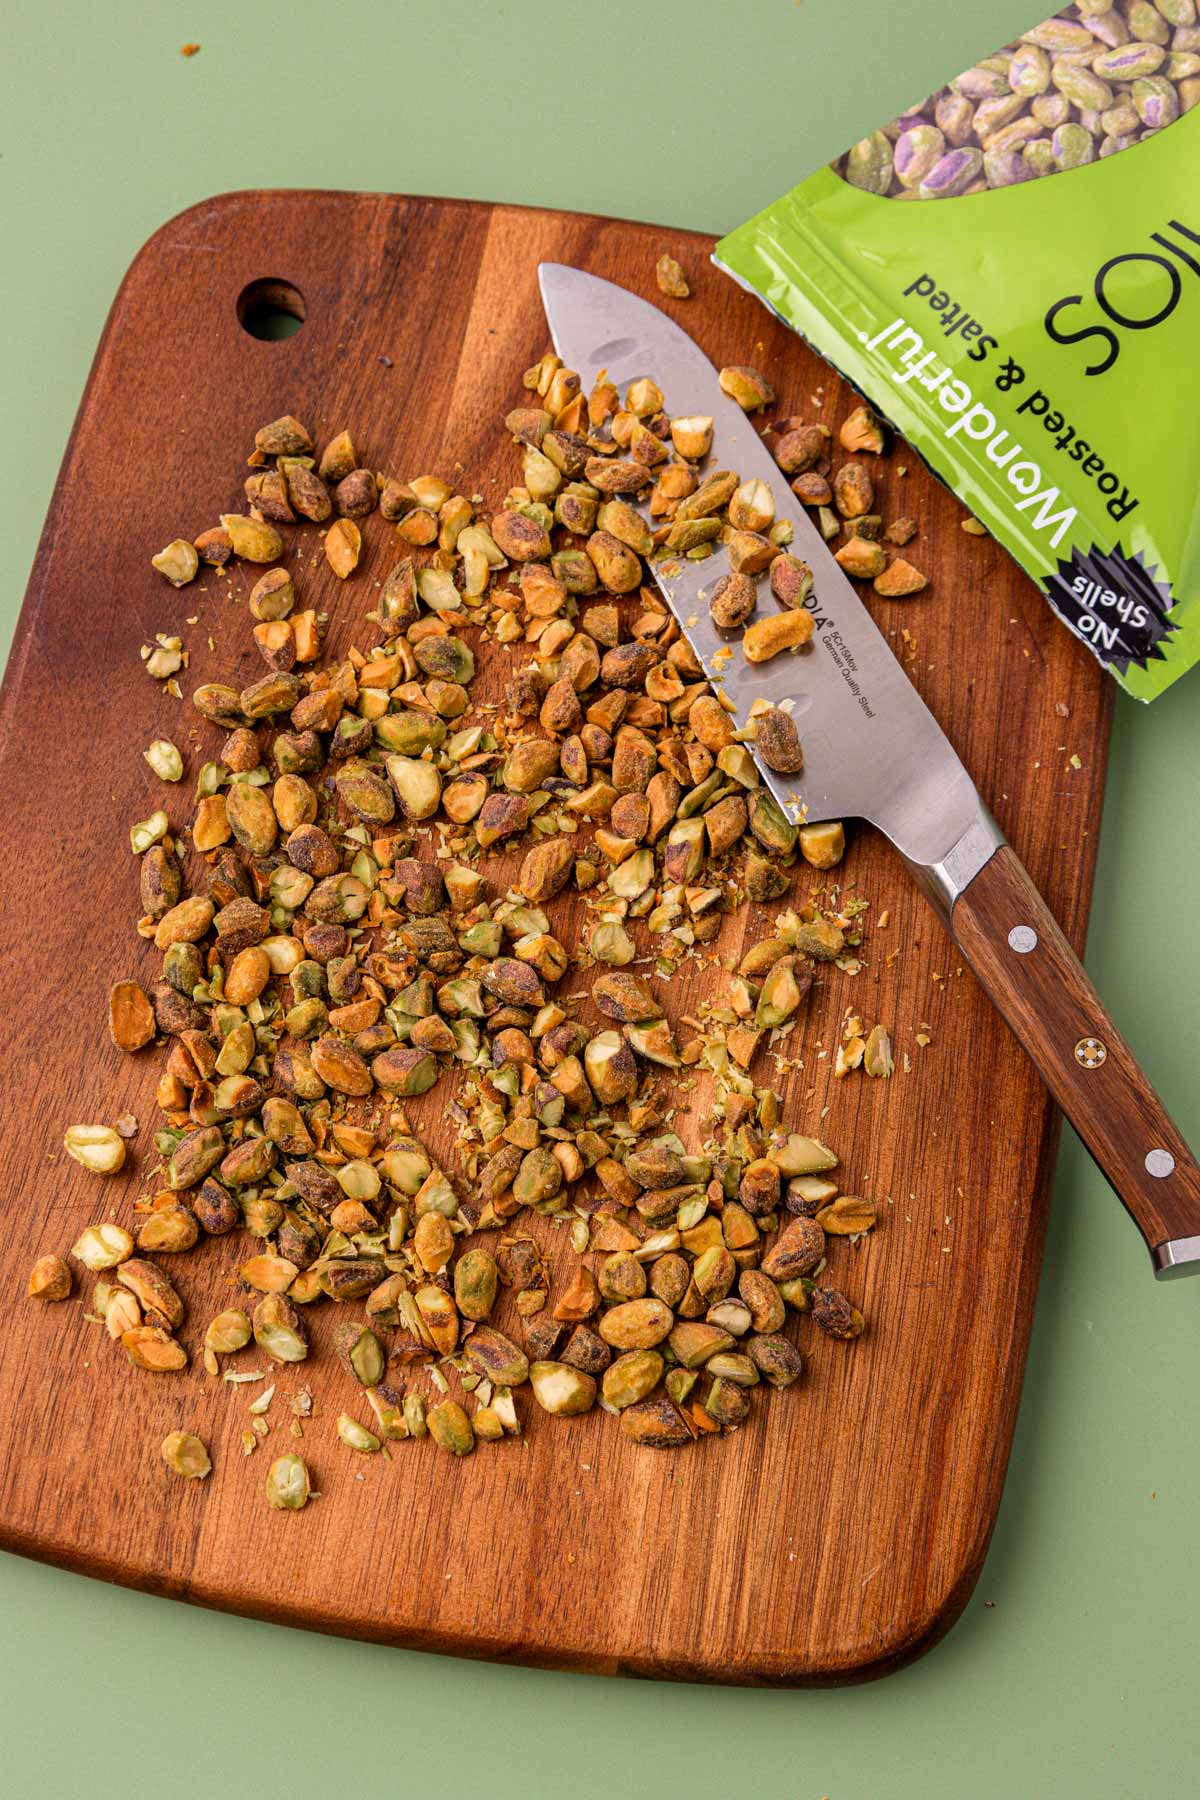 Pistachios being chopped on a wooden cutting board.